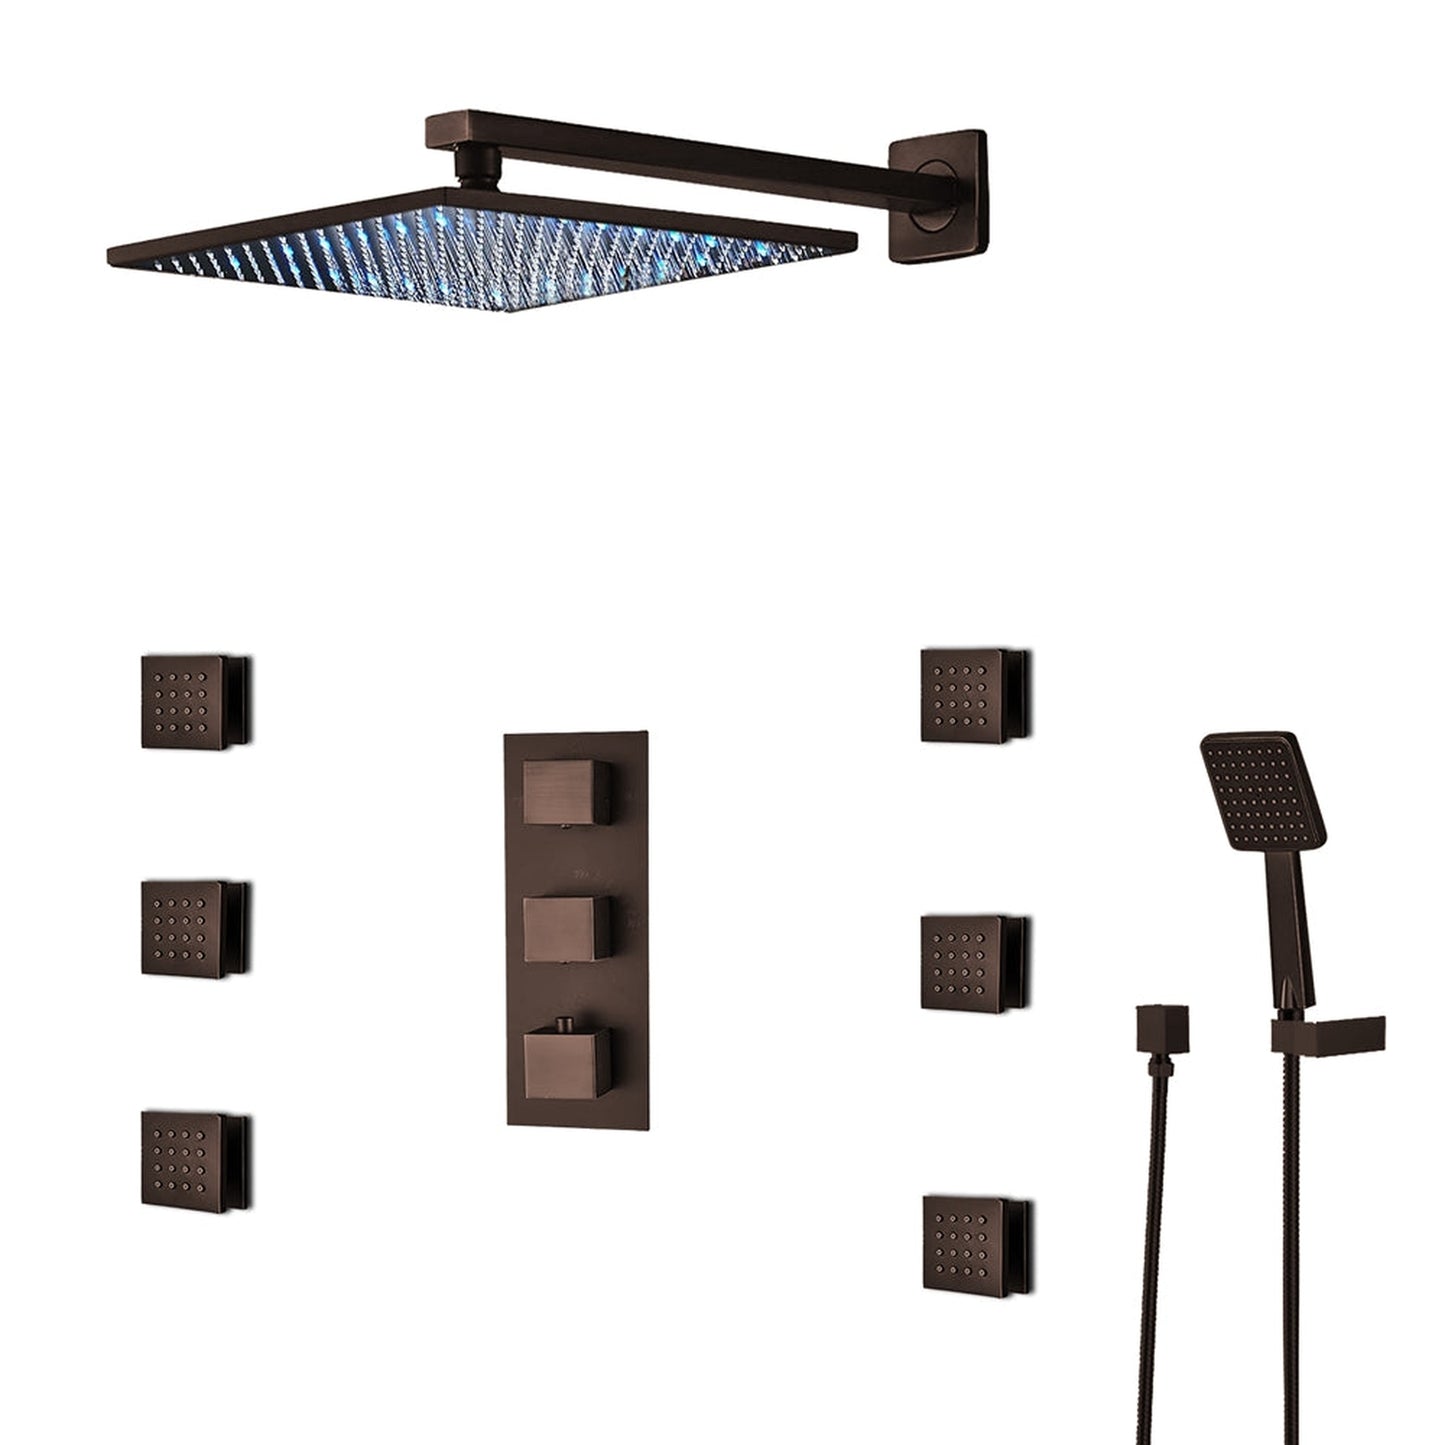 Fontana Sierra 12" Light Oil Rubbed Bronze Square Wall-Mounted LED Shower System With 6-Jet Body Sprays and Hand Shower